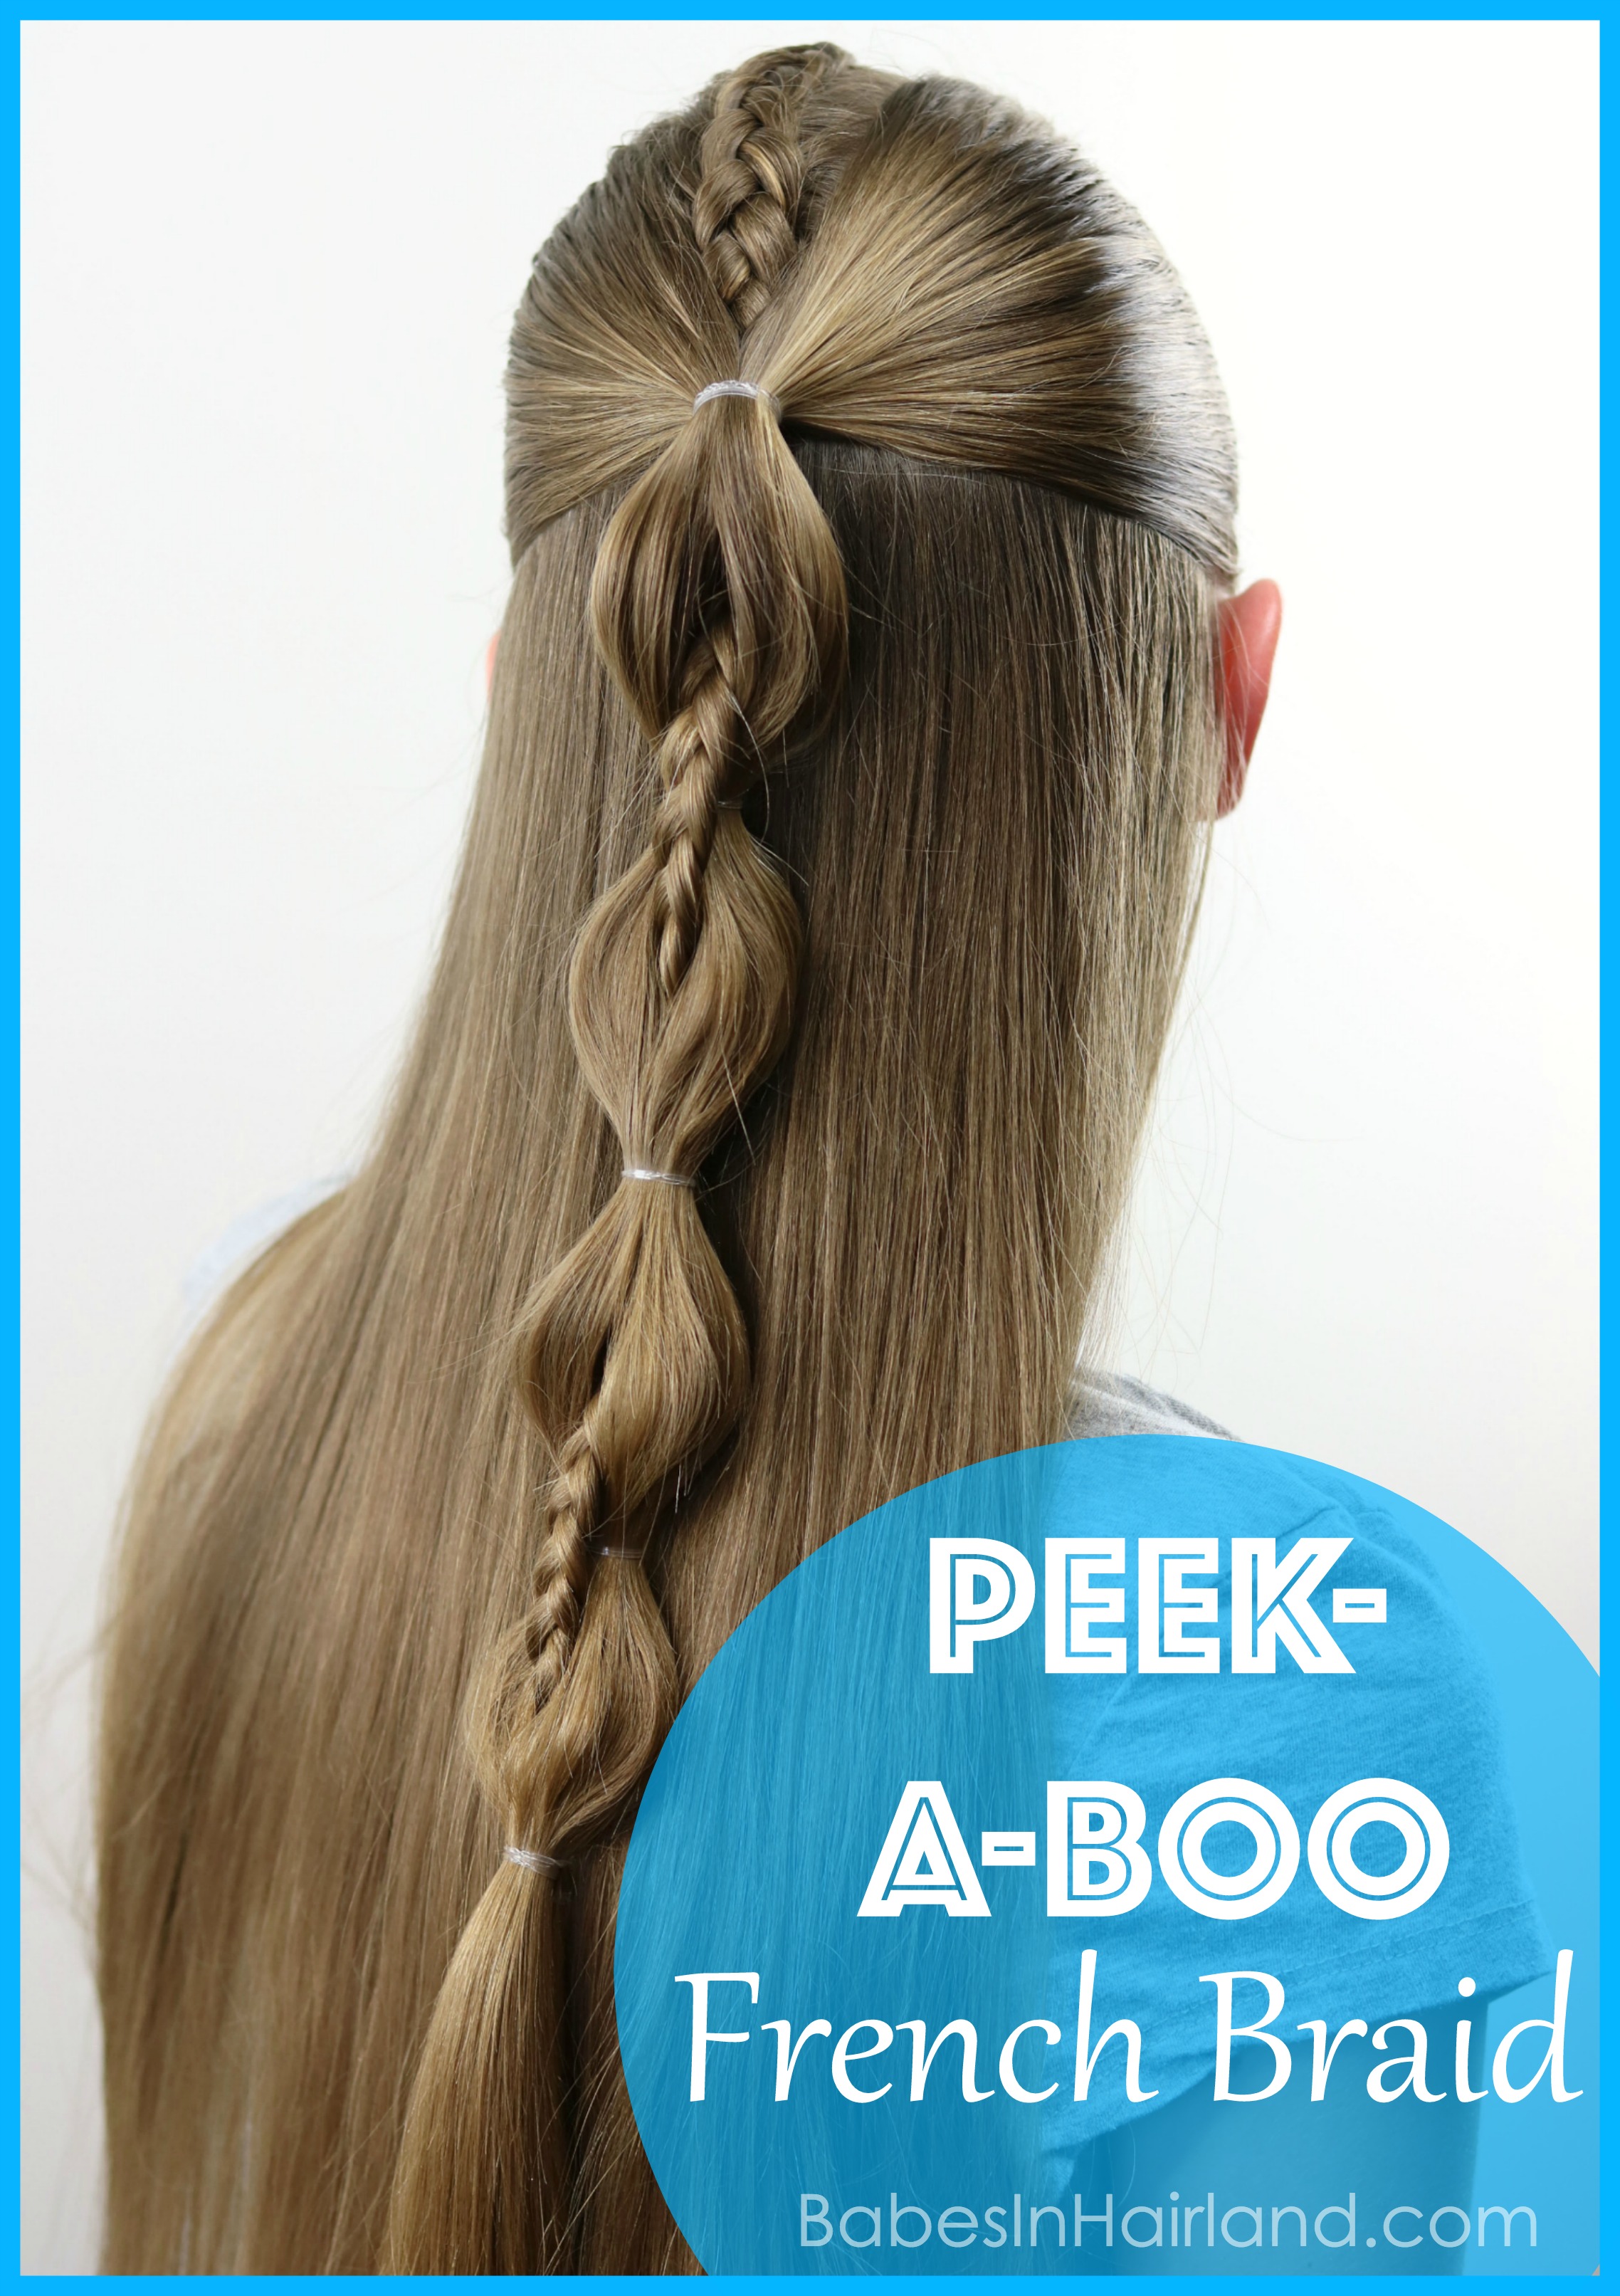 Peek A Boo French Braid Hairstyle For Teens Tweens And Little Girls Braid multiple strands to get at least 4 plants. babes in hairland